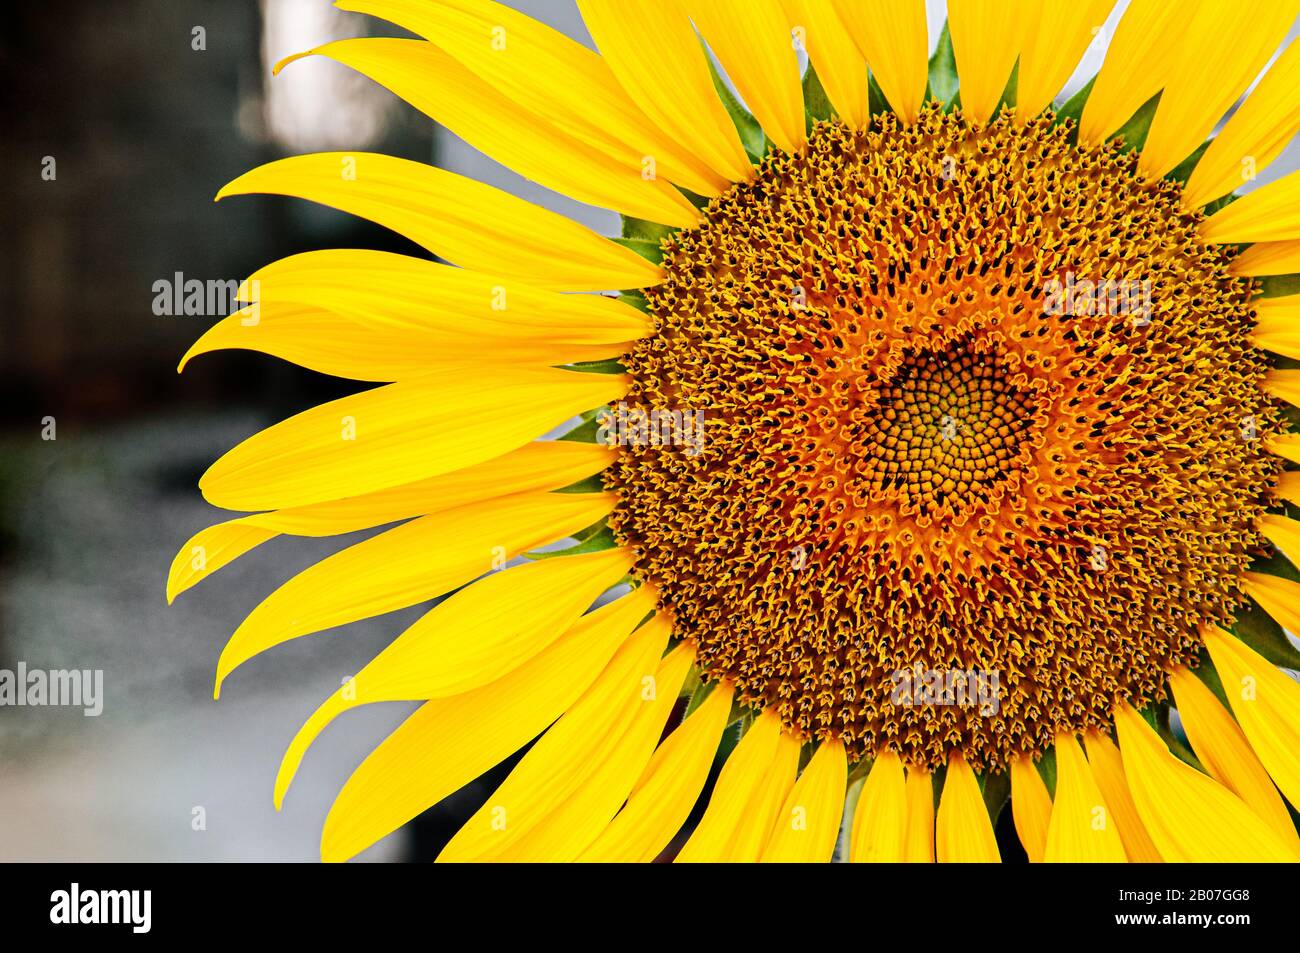 Macro close up details of golden yellow sunflower disk floret and ray floret petals. Nature plant background with text space on one side. Stock Photo